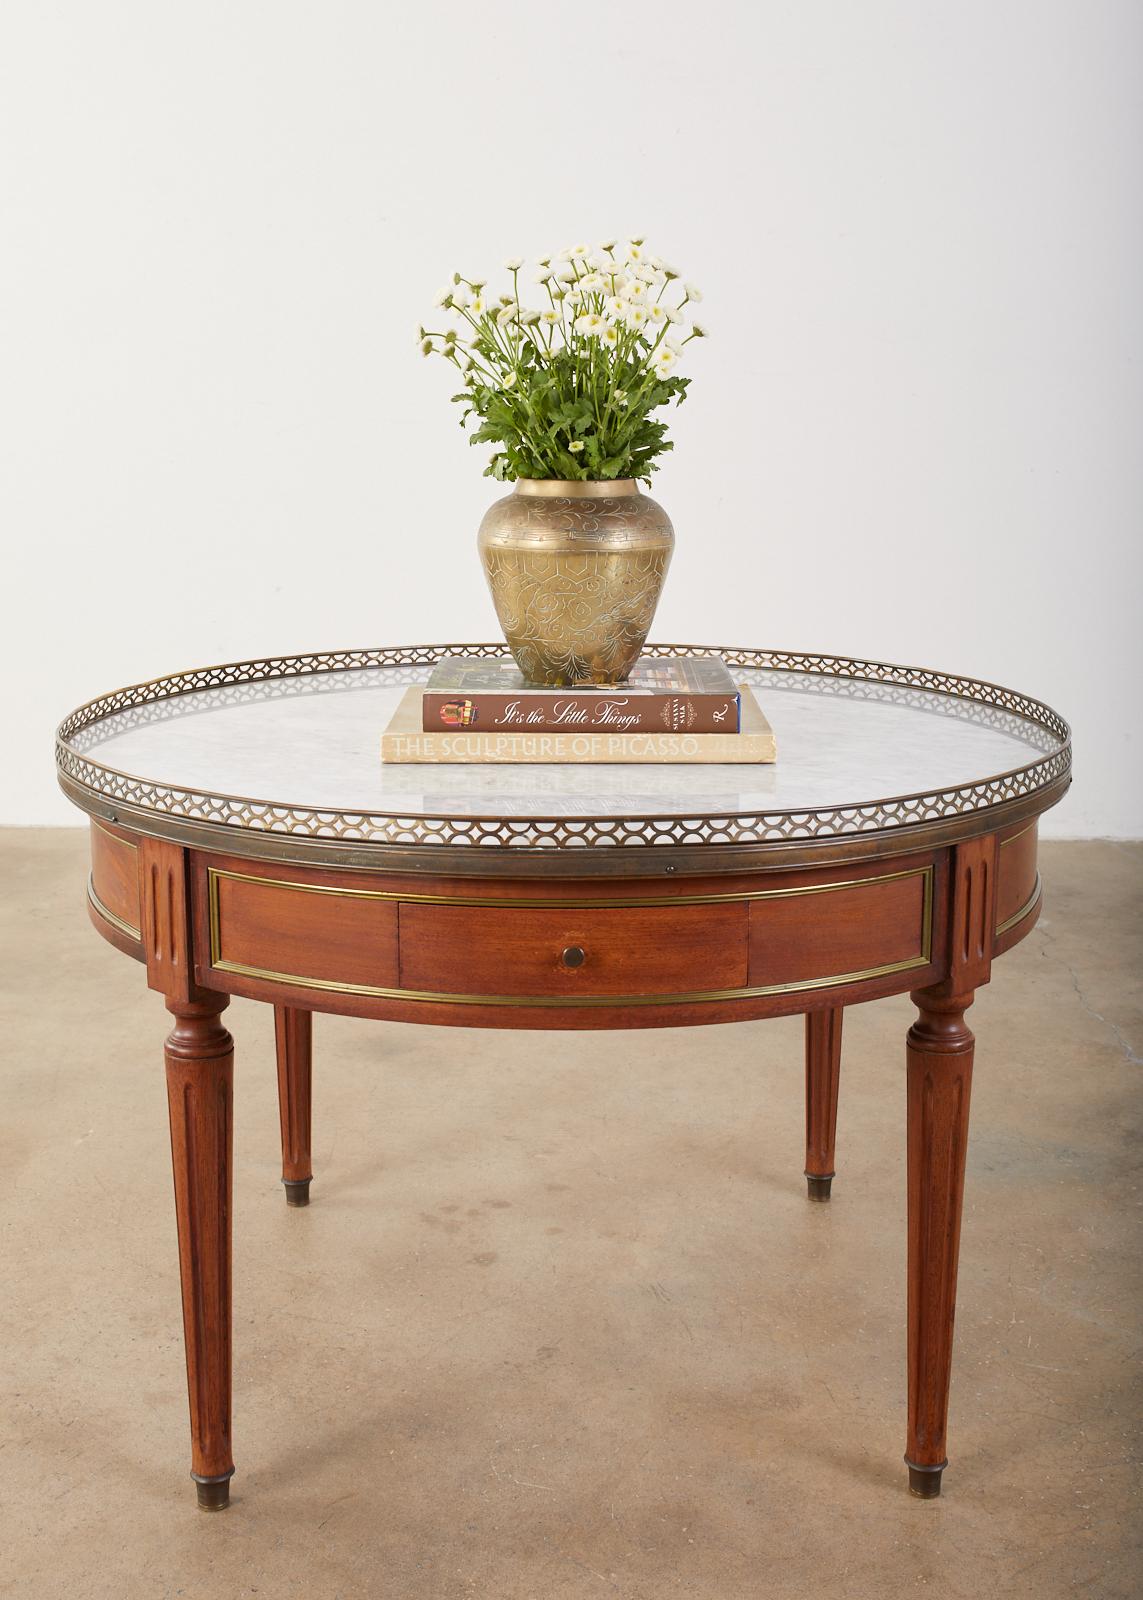 Stately French Bouillotte table or cocktail table made in the grand Louis XVI style. Features a white marble Carrara top and bronze mounts on the case. The circular marble top has a pierced brass galleried edge over a two-drawer bronze mounted